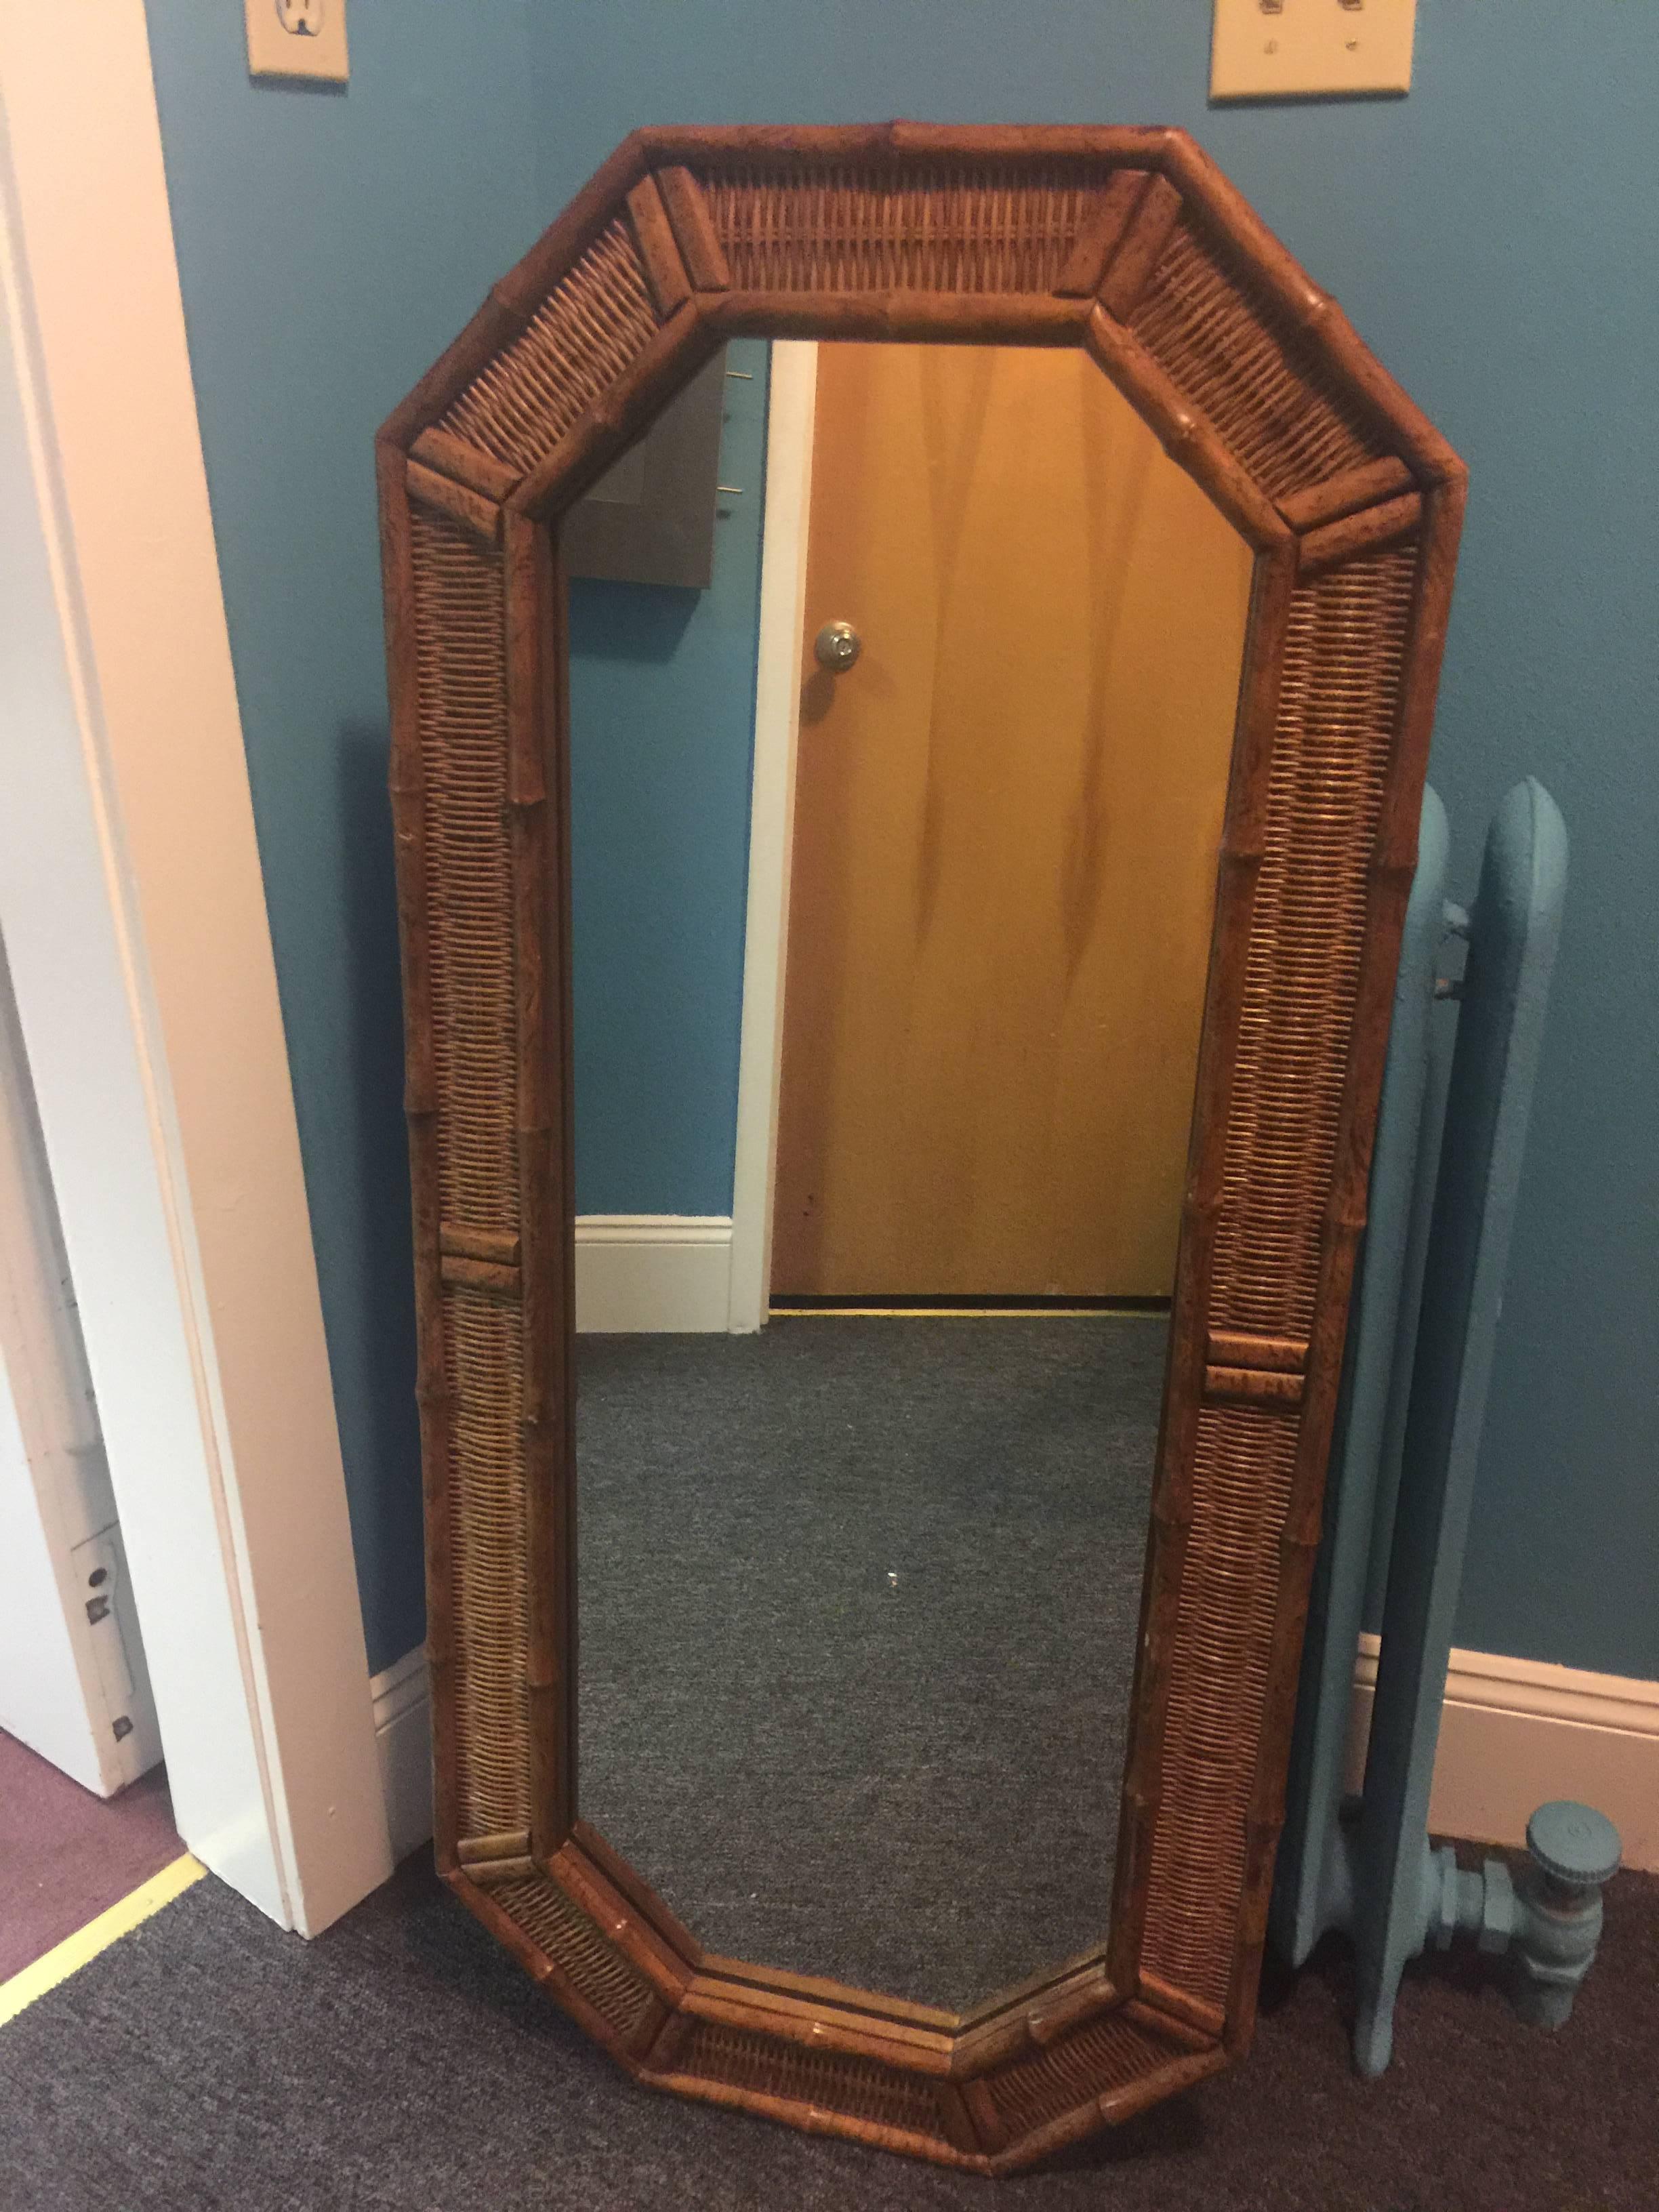 Matched pair of 1970s wicker and wood bamboo elongated octagonal wall mirrors. These are substantial in form and construction.